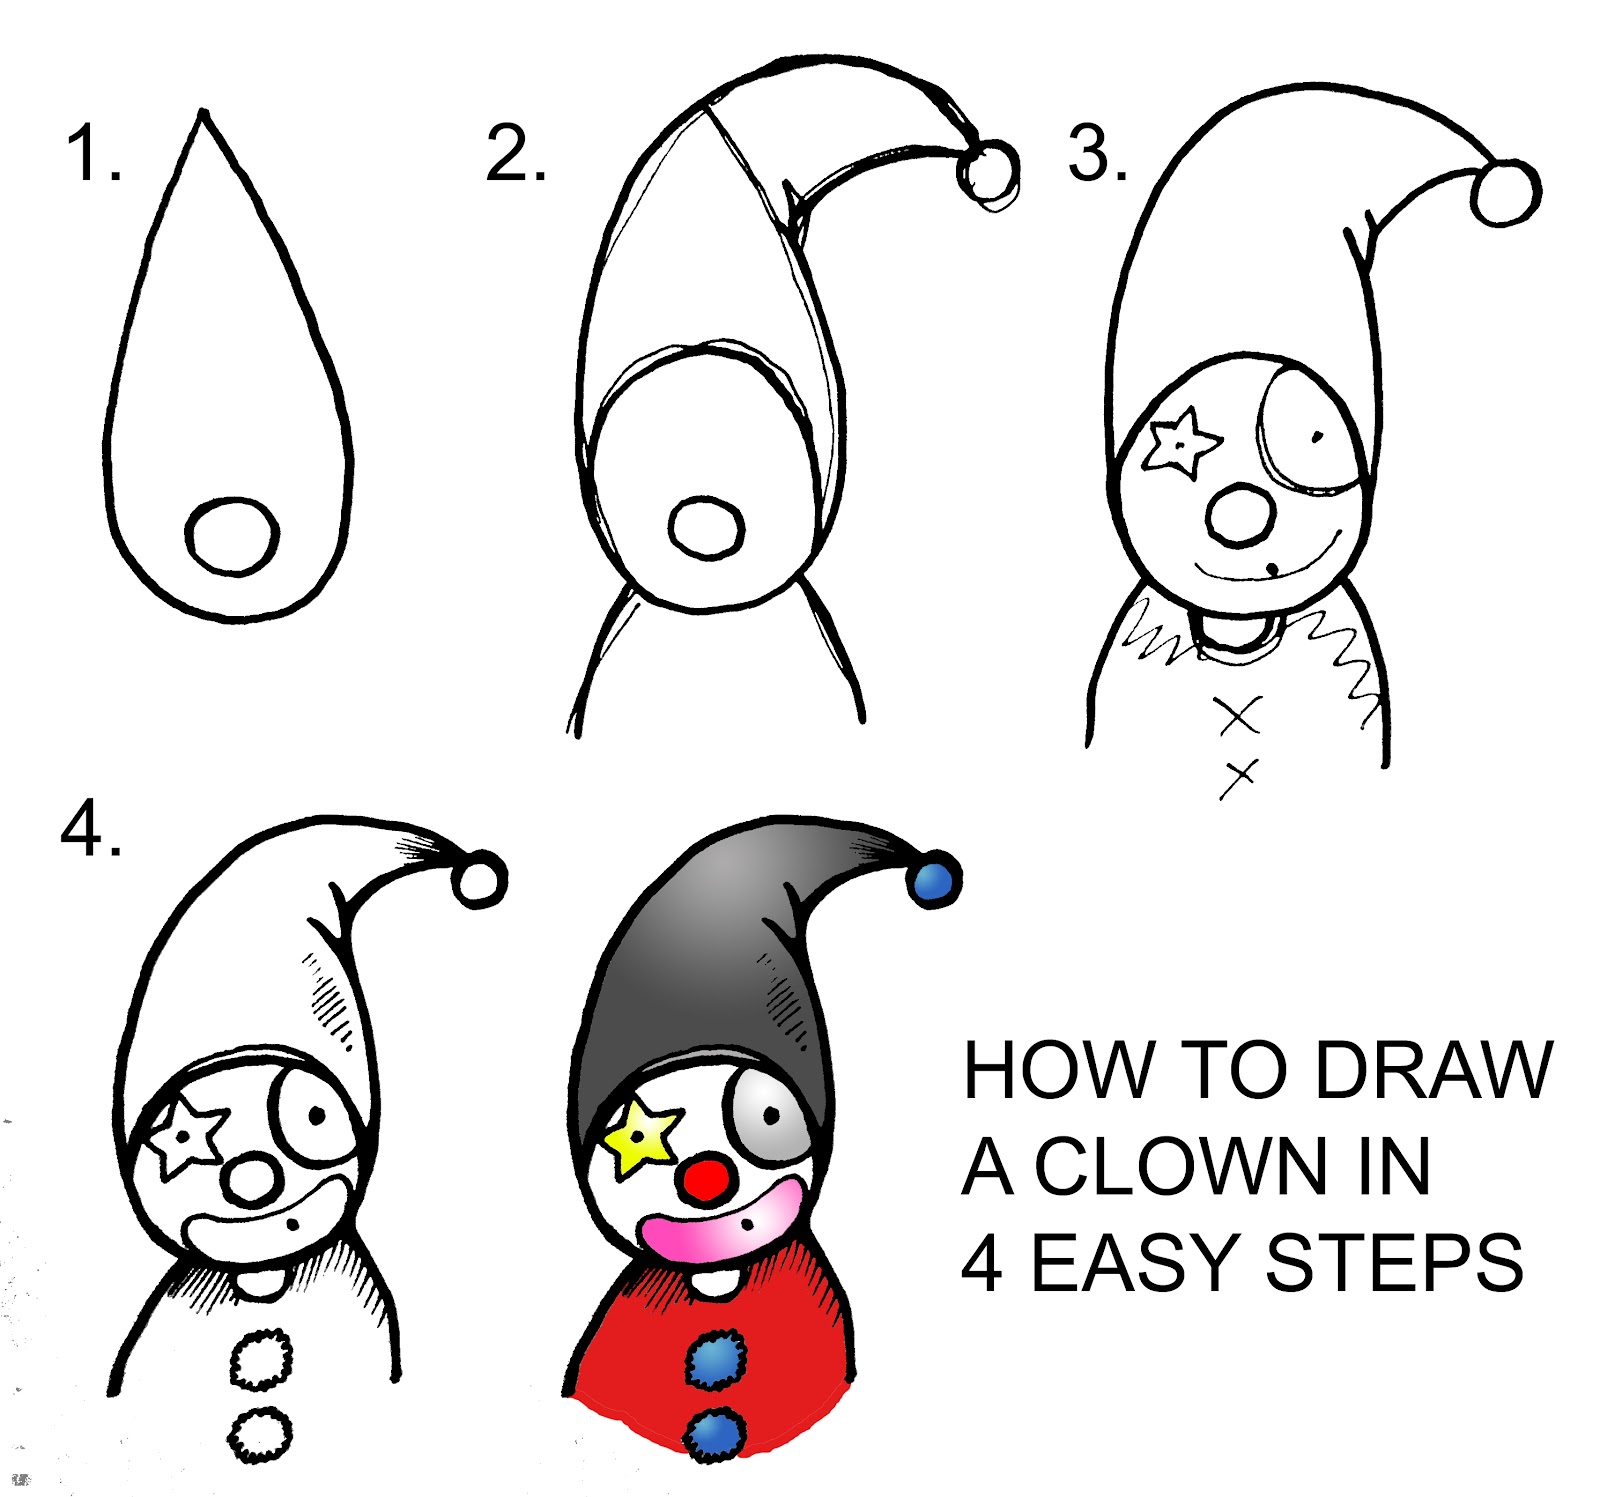 DARYL HOBSON ARTWORK: How To Draw A Clown step by step